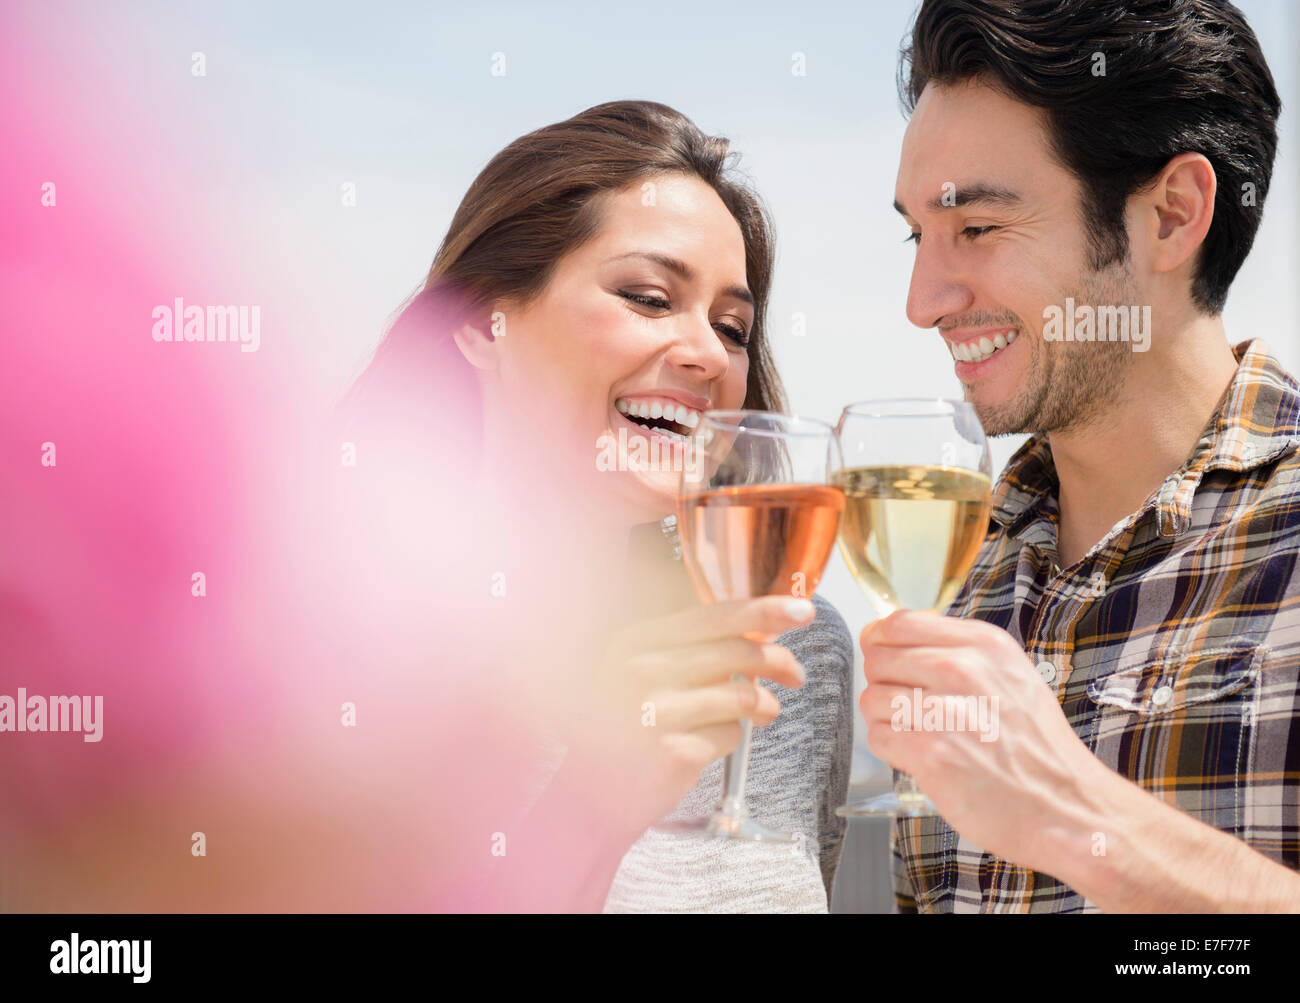 Couple toasting each other with wine Banque D'Images